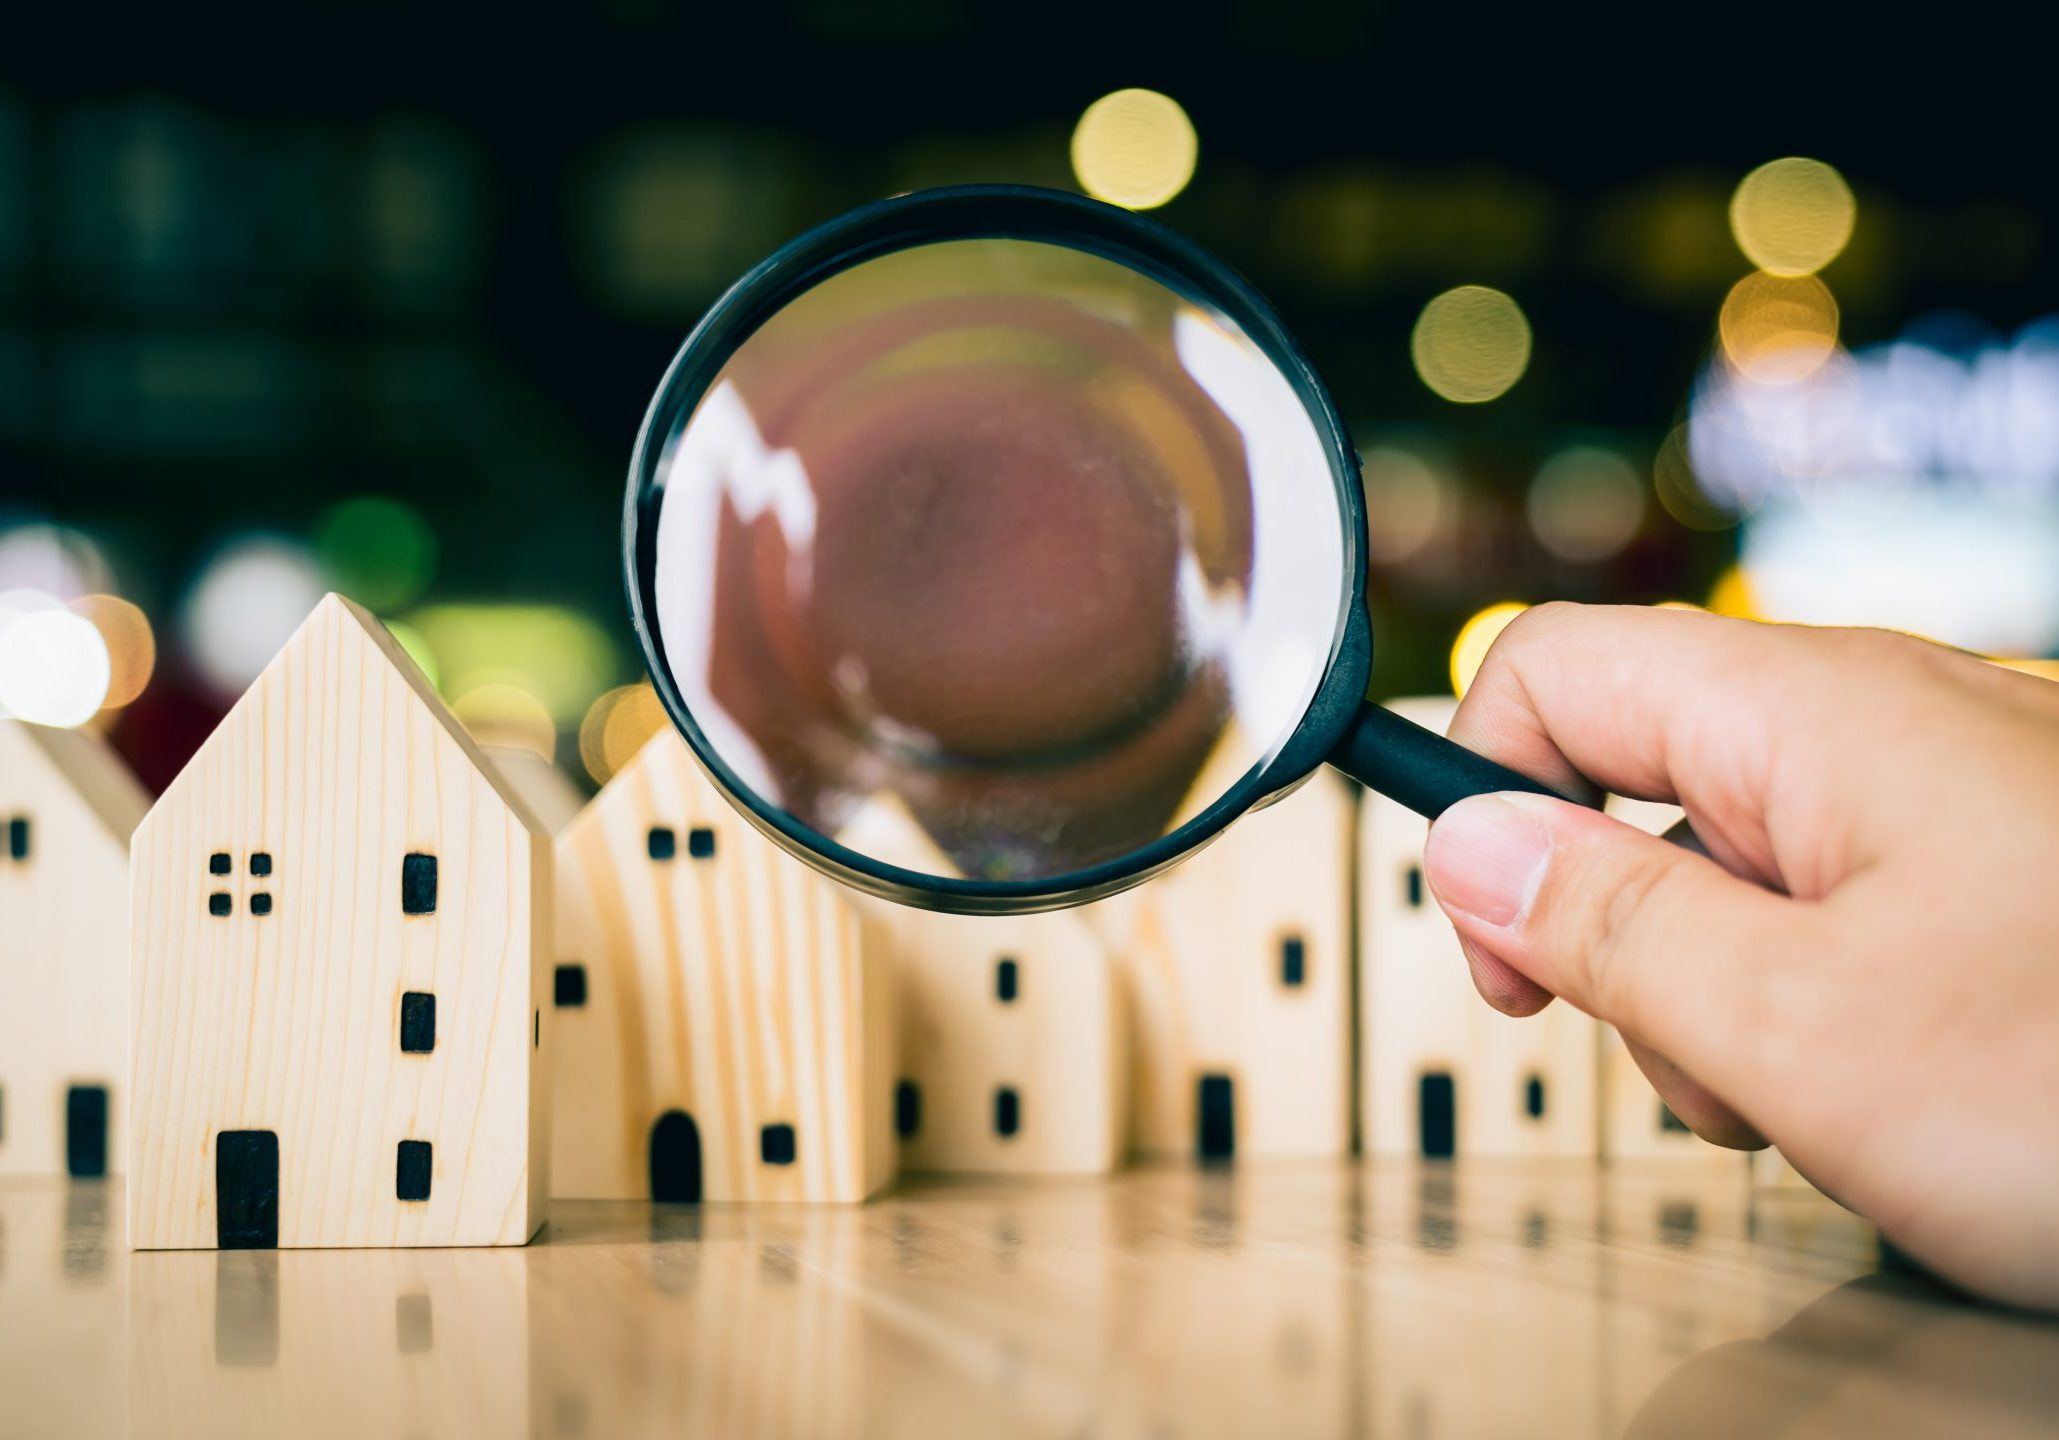 Magnifying glass for looking at house model, house selection, real estate concept.